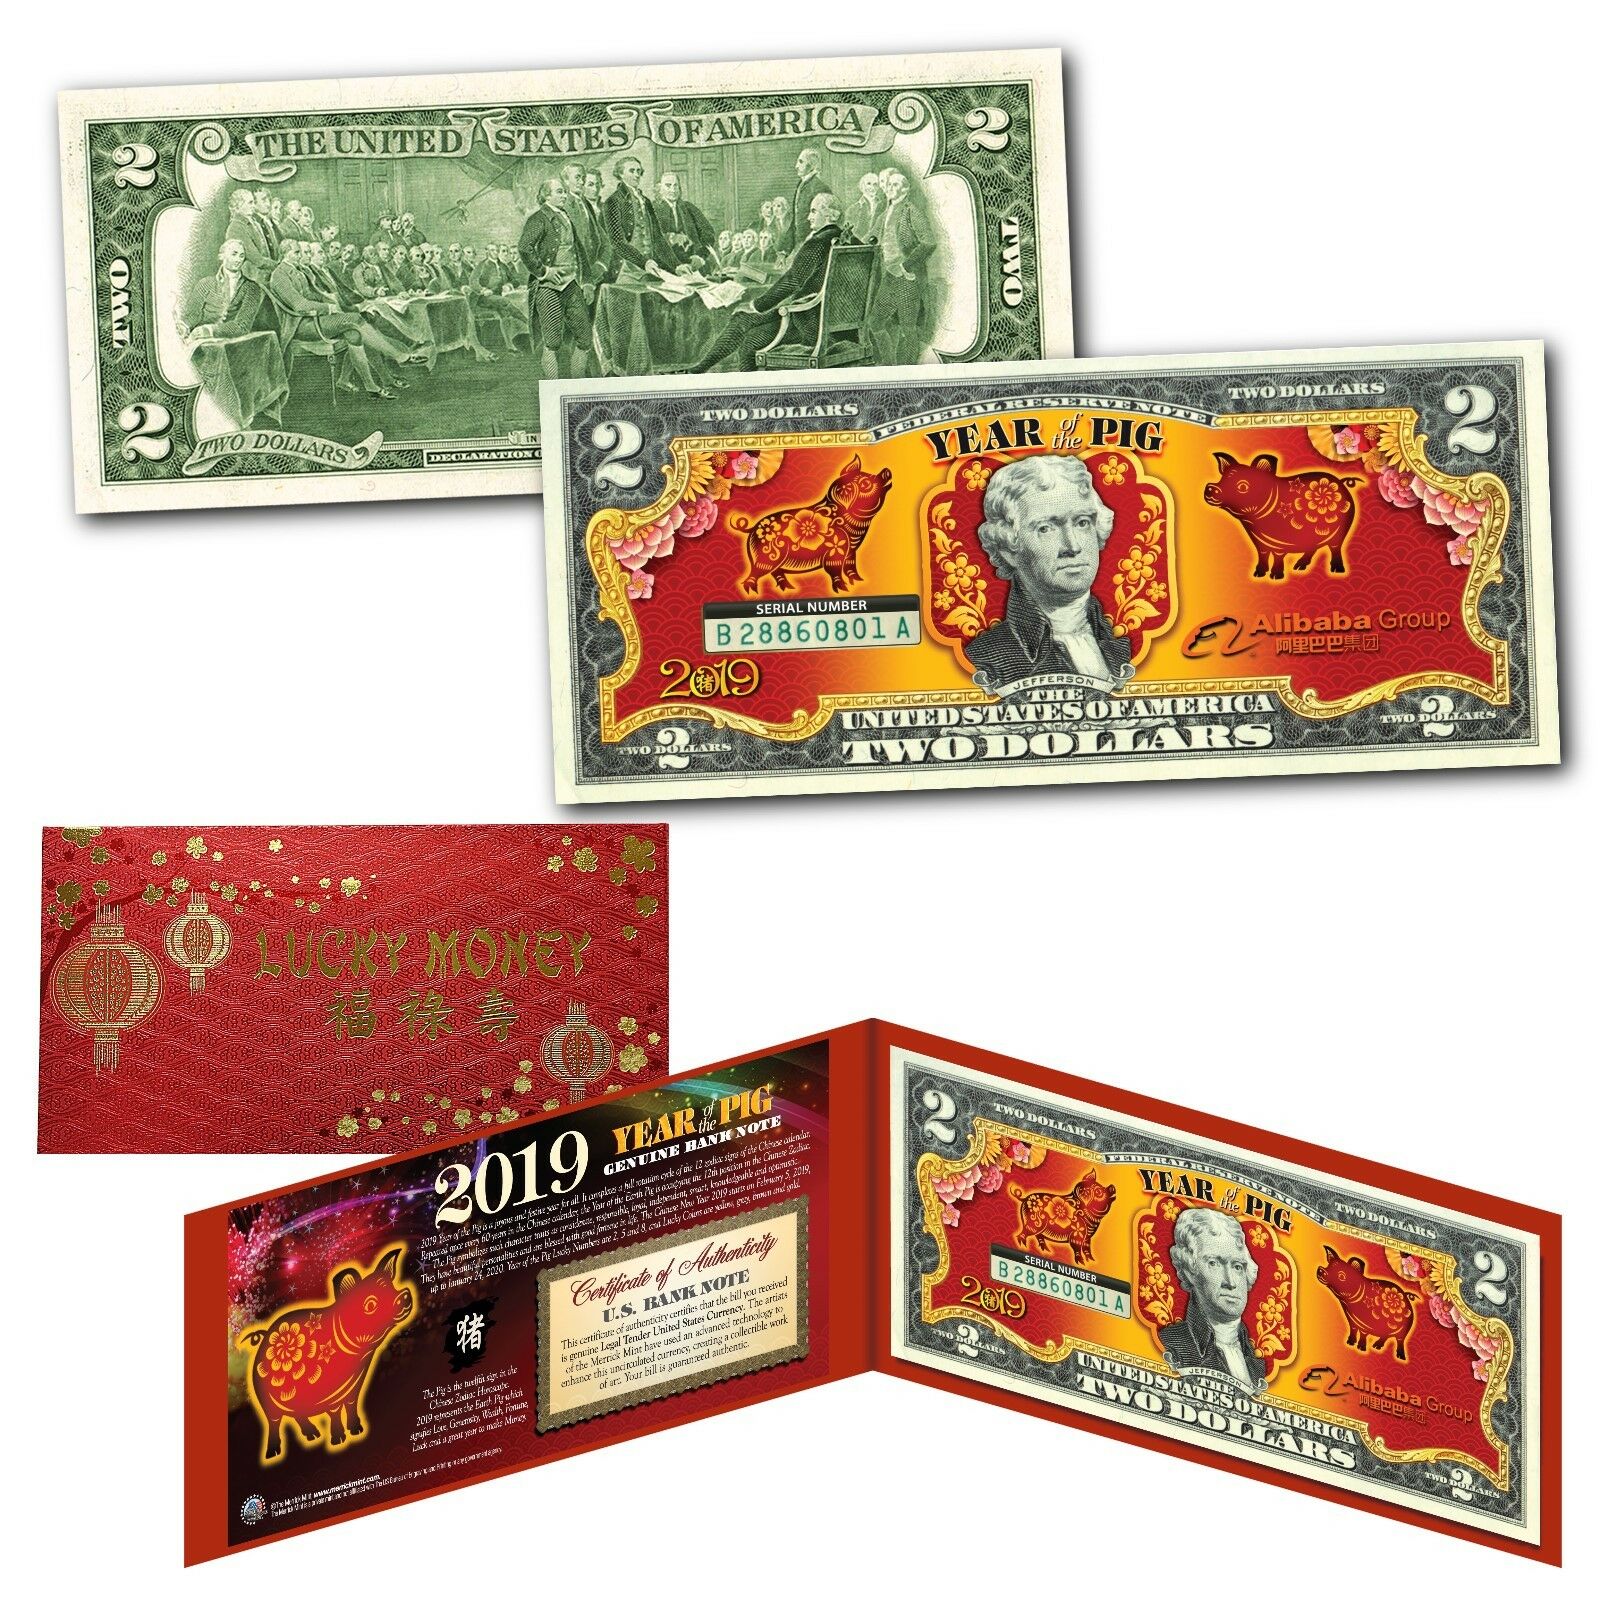 2019 CNY Chinese New YEAR OF THE PIG Polychromatic 8 COLOR Pigs $2 US Bill BLUE 